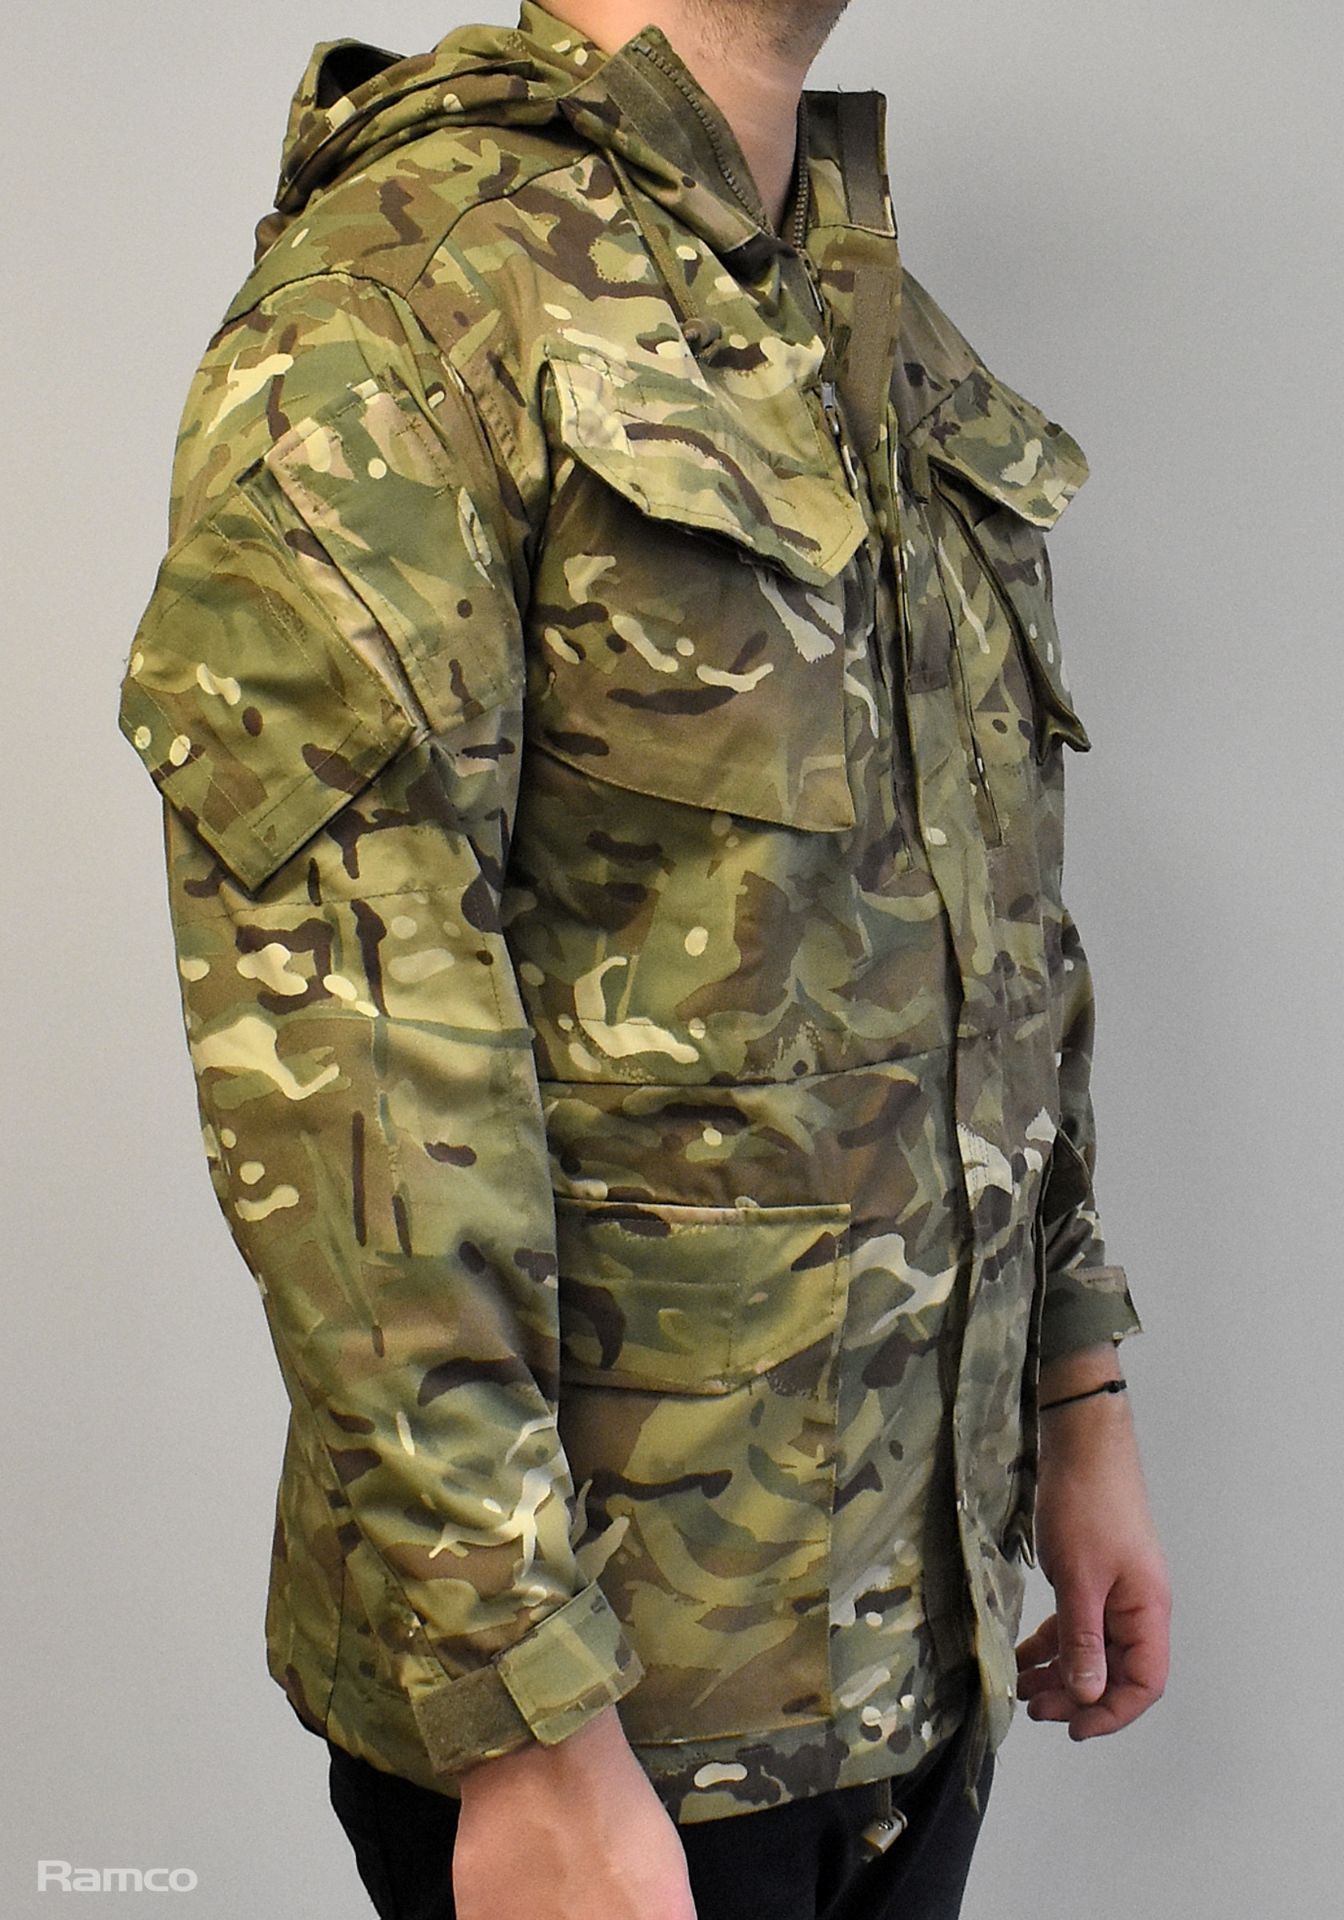 60x British Army MTP combat smocks 2 windproof - mixed grades and sizes - Image 4 of 12